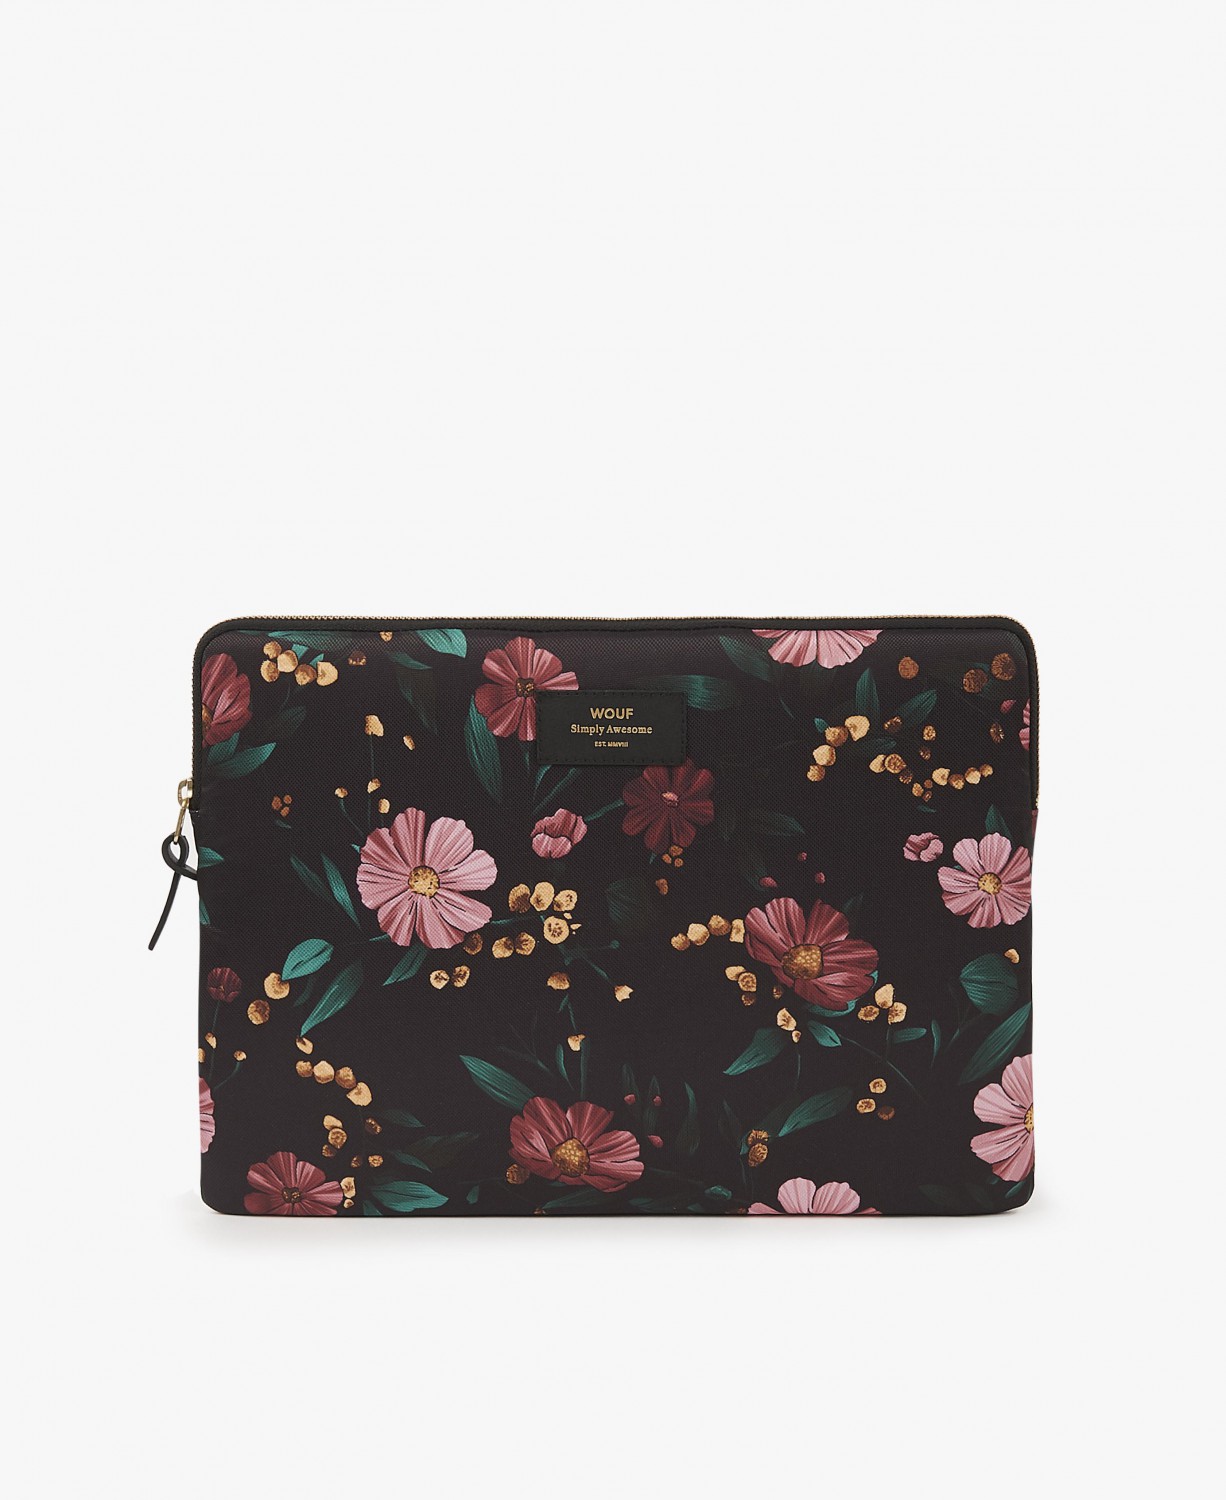 WOUF | Black Flowers Laptop sleeve 15 inches